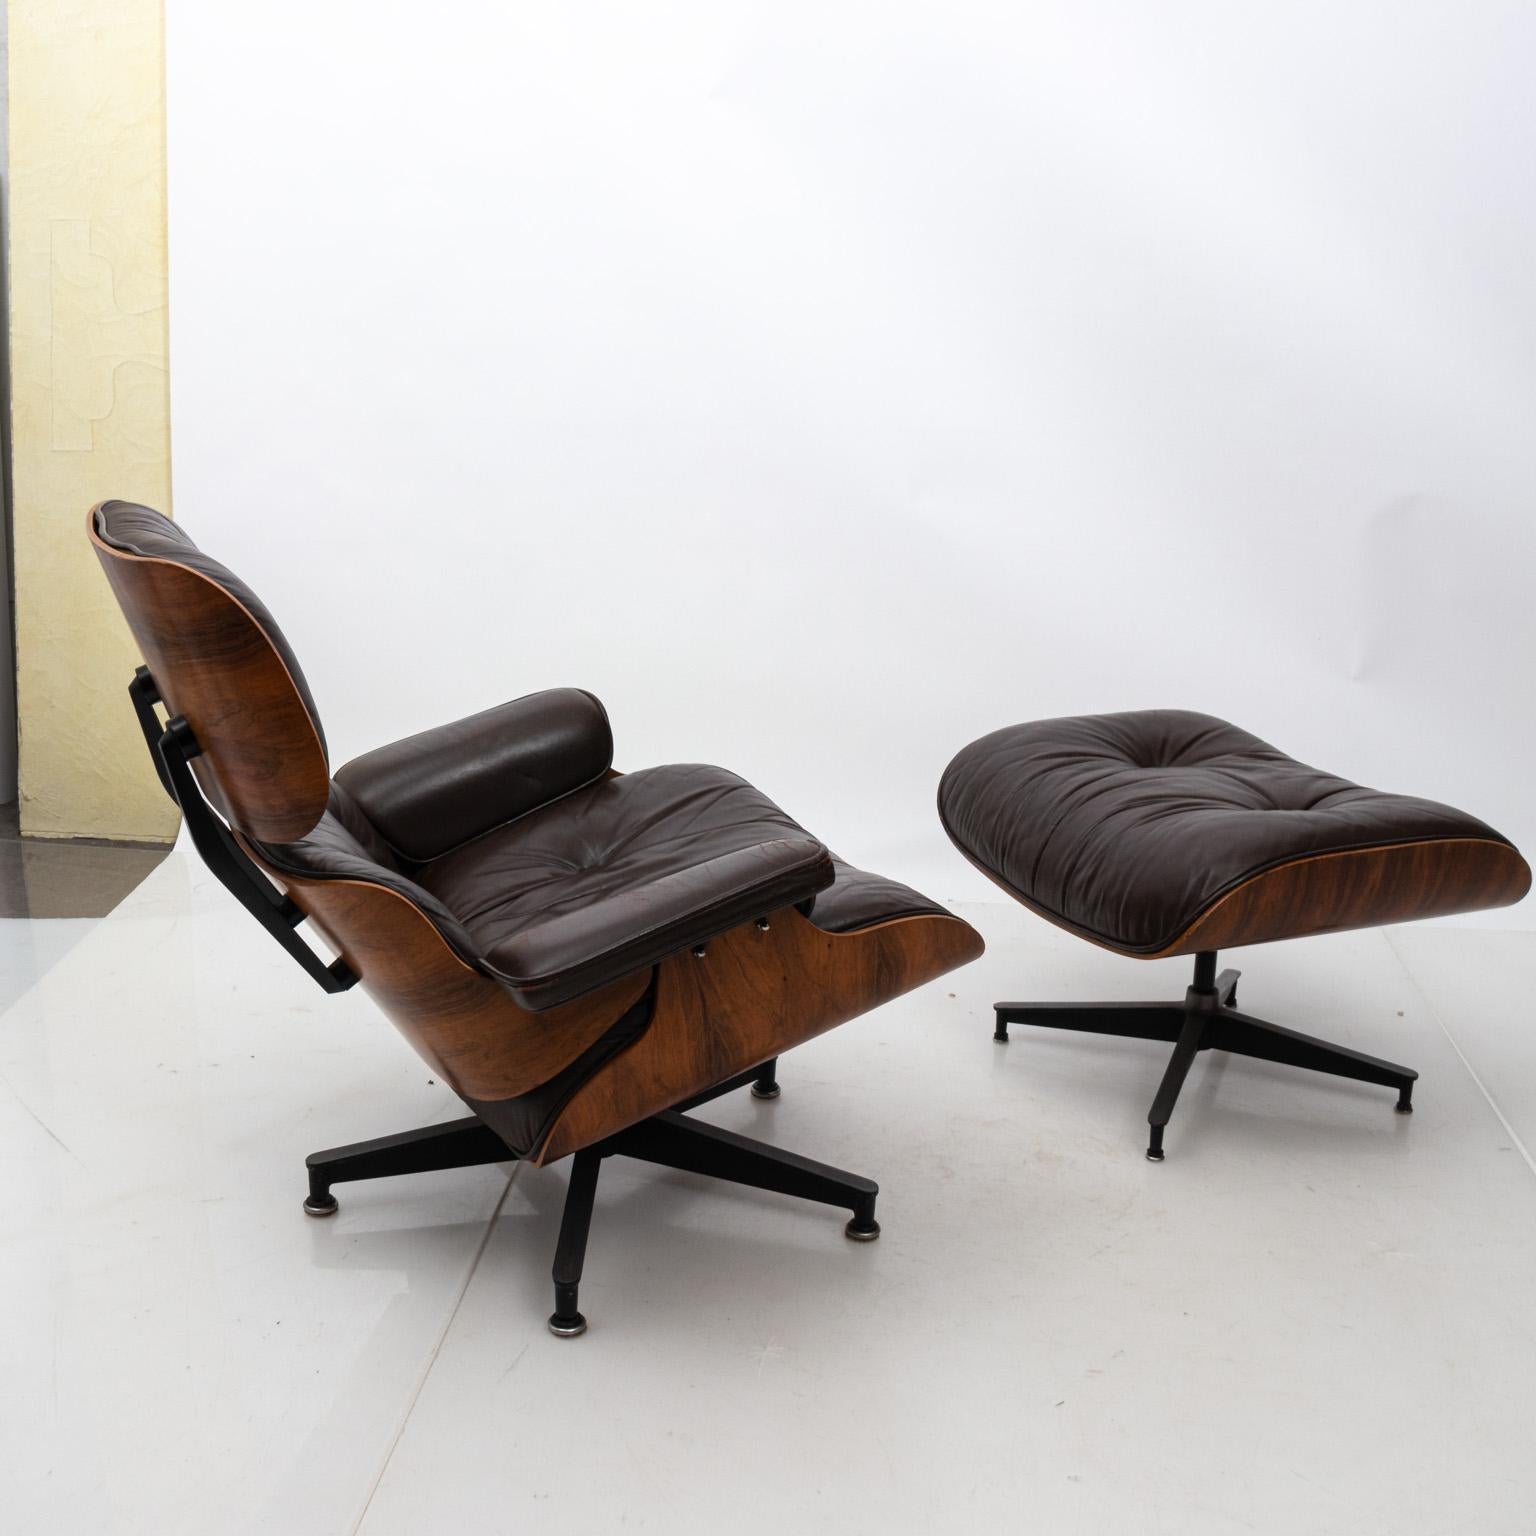 American Mid-Century Modern Eames Chair and Ottoman